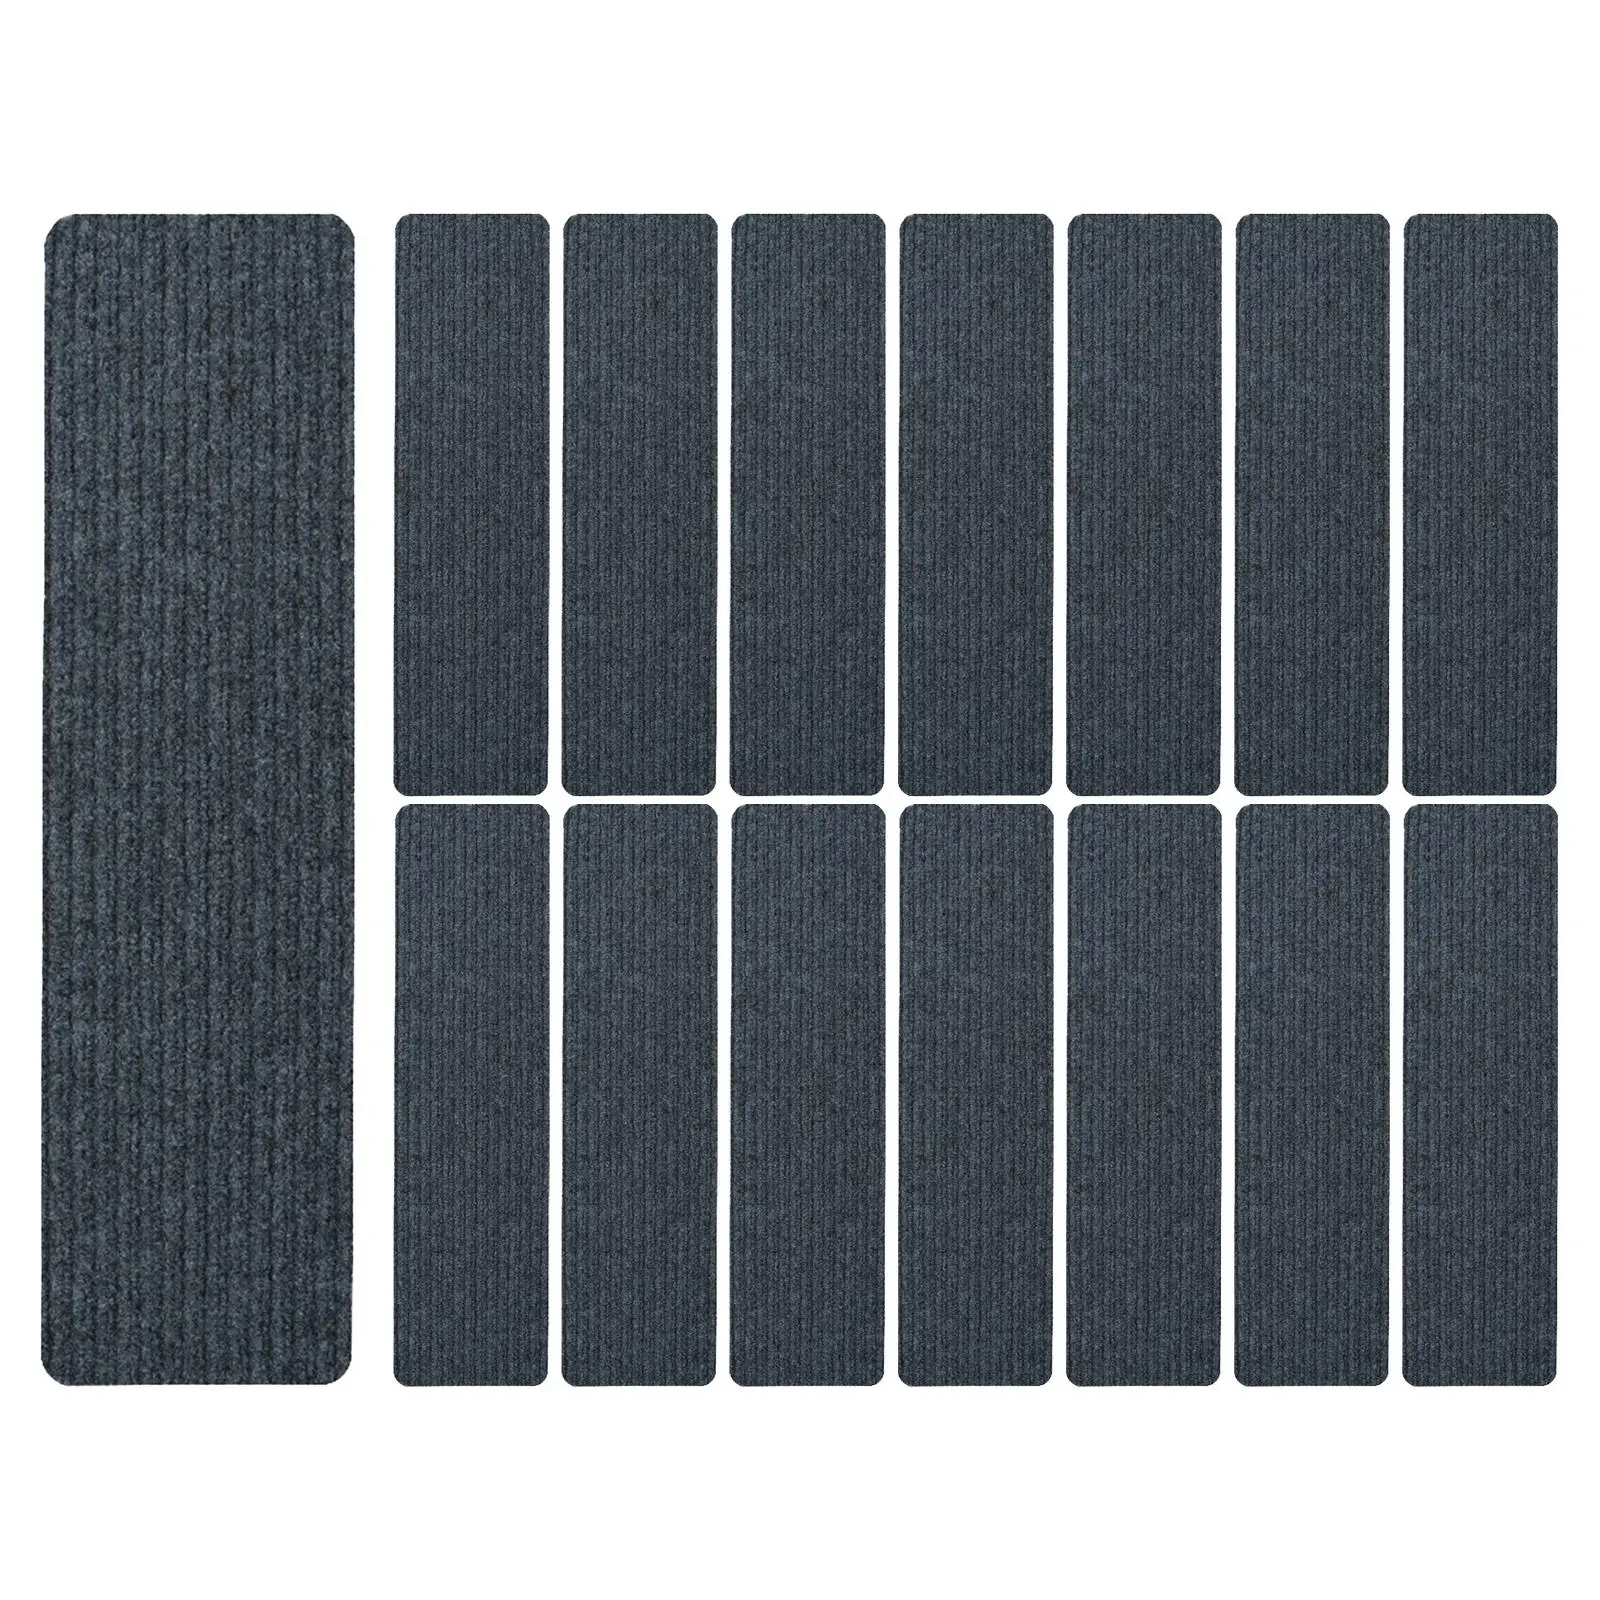 15 Pieces Non Skid Safety Rug Stair Treads Stair Rugs Stair Runner for Kids Elders Wooden Steps Pets Dogs